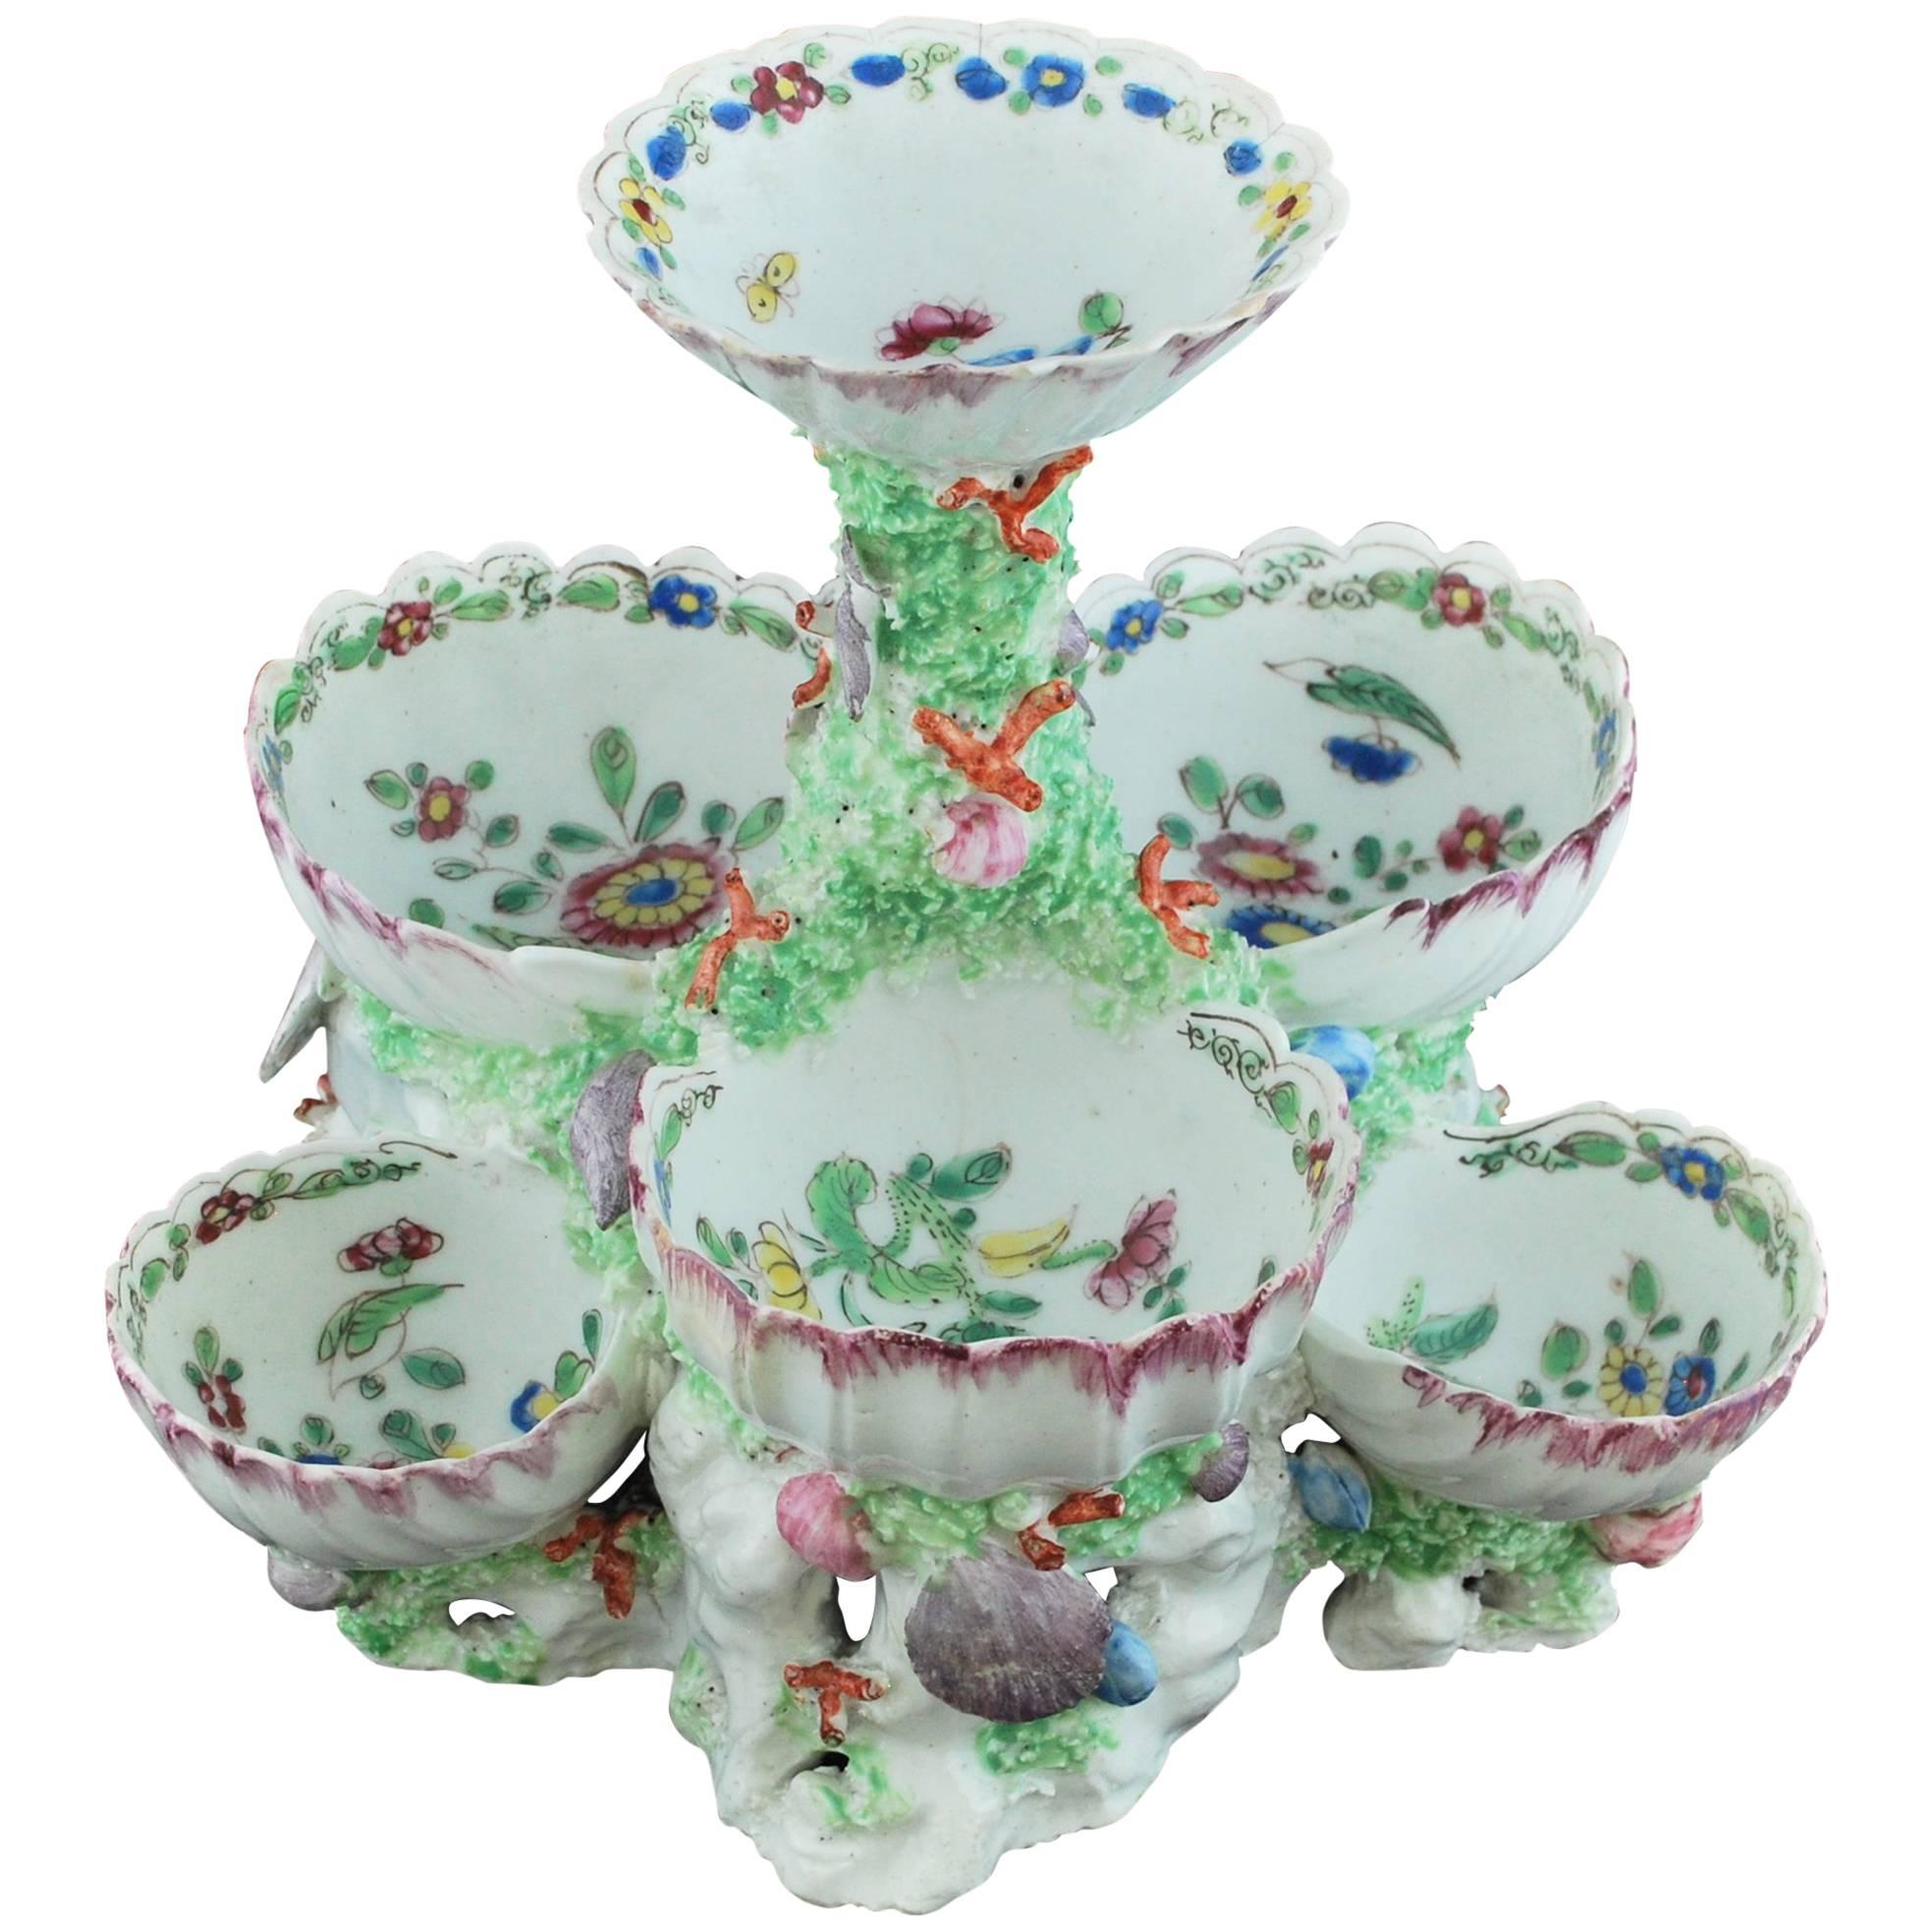 Shell Sweetmeat Stand, Bow Porcelain, circa 1750